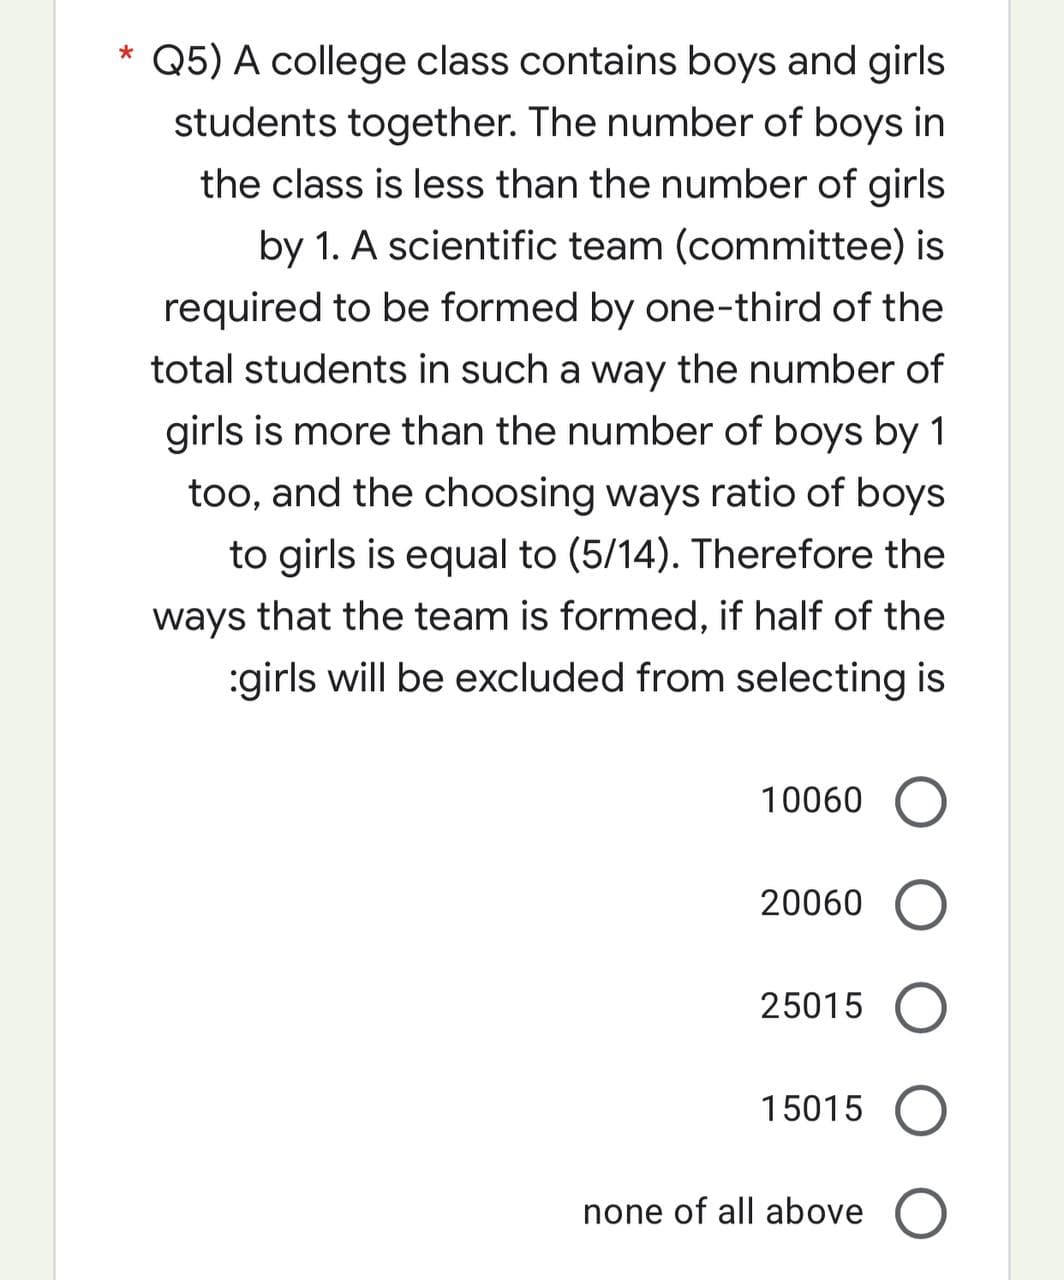 *
Q5) A college class contains boys and girls
students together. The number of boys in
the class is less than the number of girls
by 1. A scientific team (committee) is
required to be formed by one-third of the
total students in such a way the number of
girls is more than the number of boys by 1
too, and the choosing ways ratio of boys
to girls is equal to (5/14). Therefore the
ways that the team is formed, if half of the
:girls will be excluded from selecting is
10060 O
20060
25015
15015
none of all above O